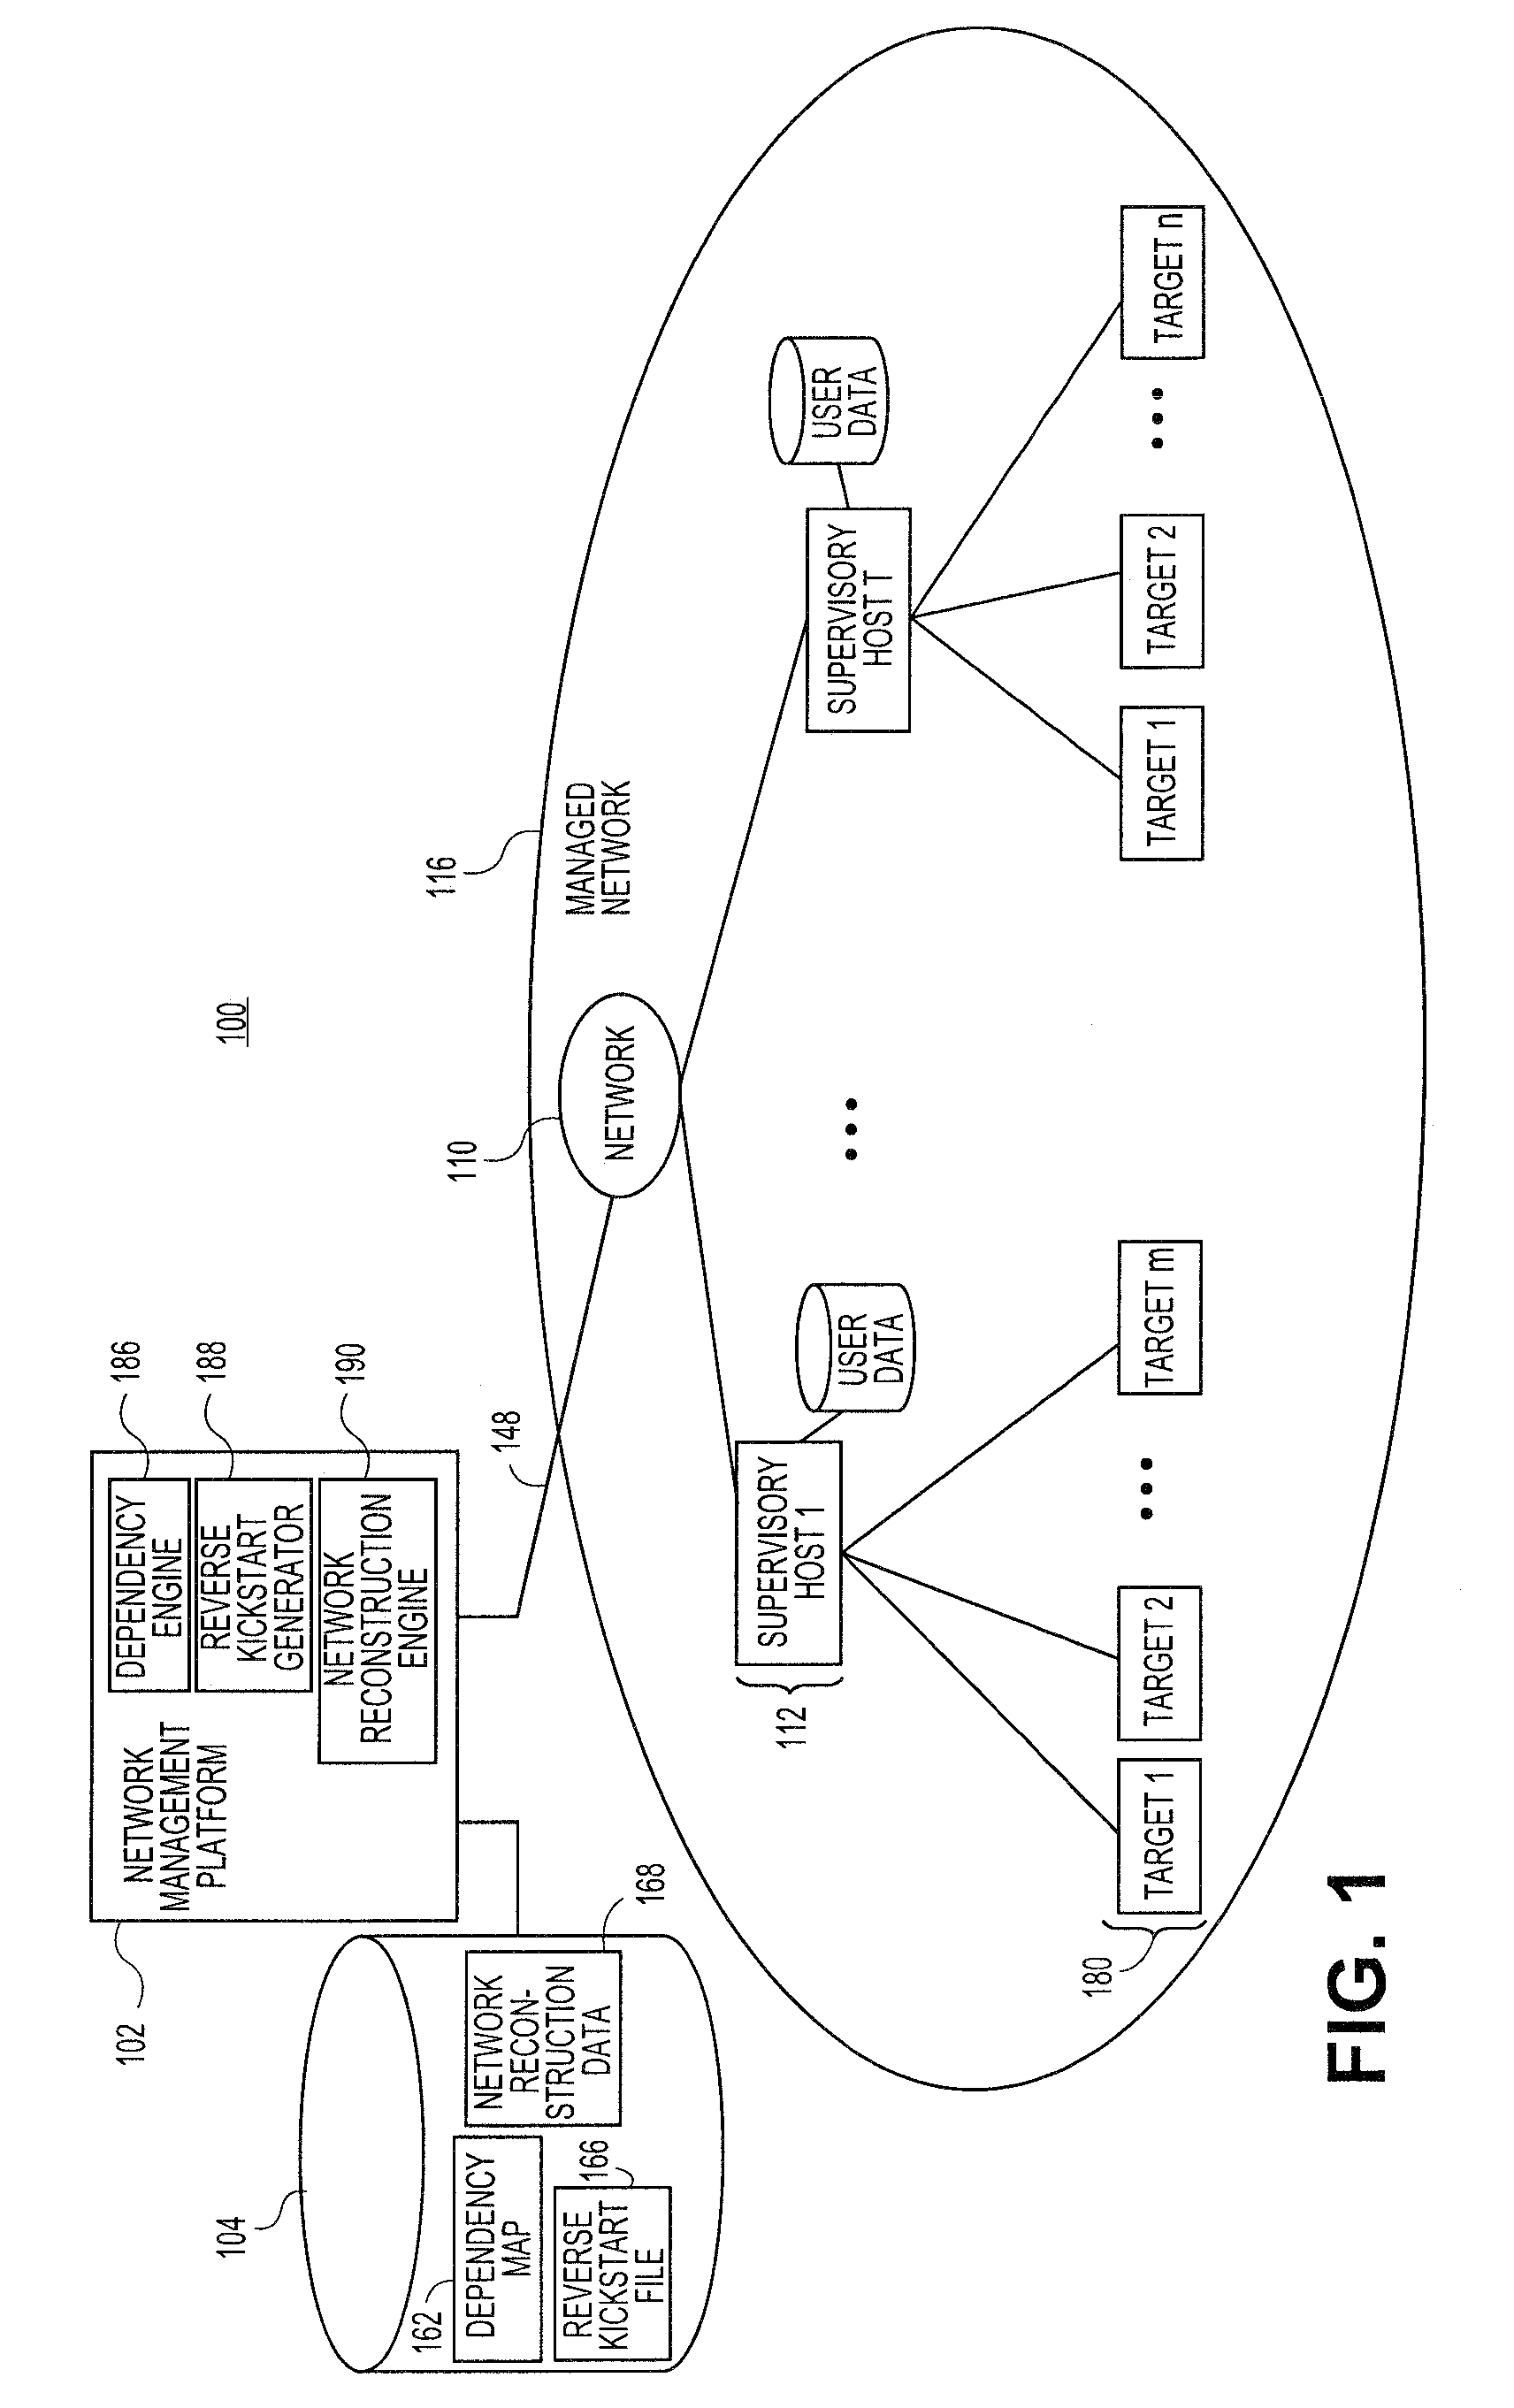 Systems and methods for automatically generating system restoration order for network recovery